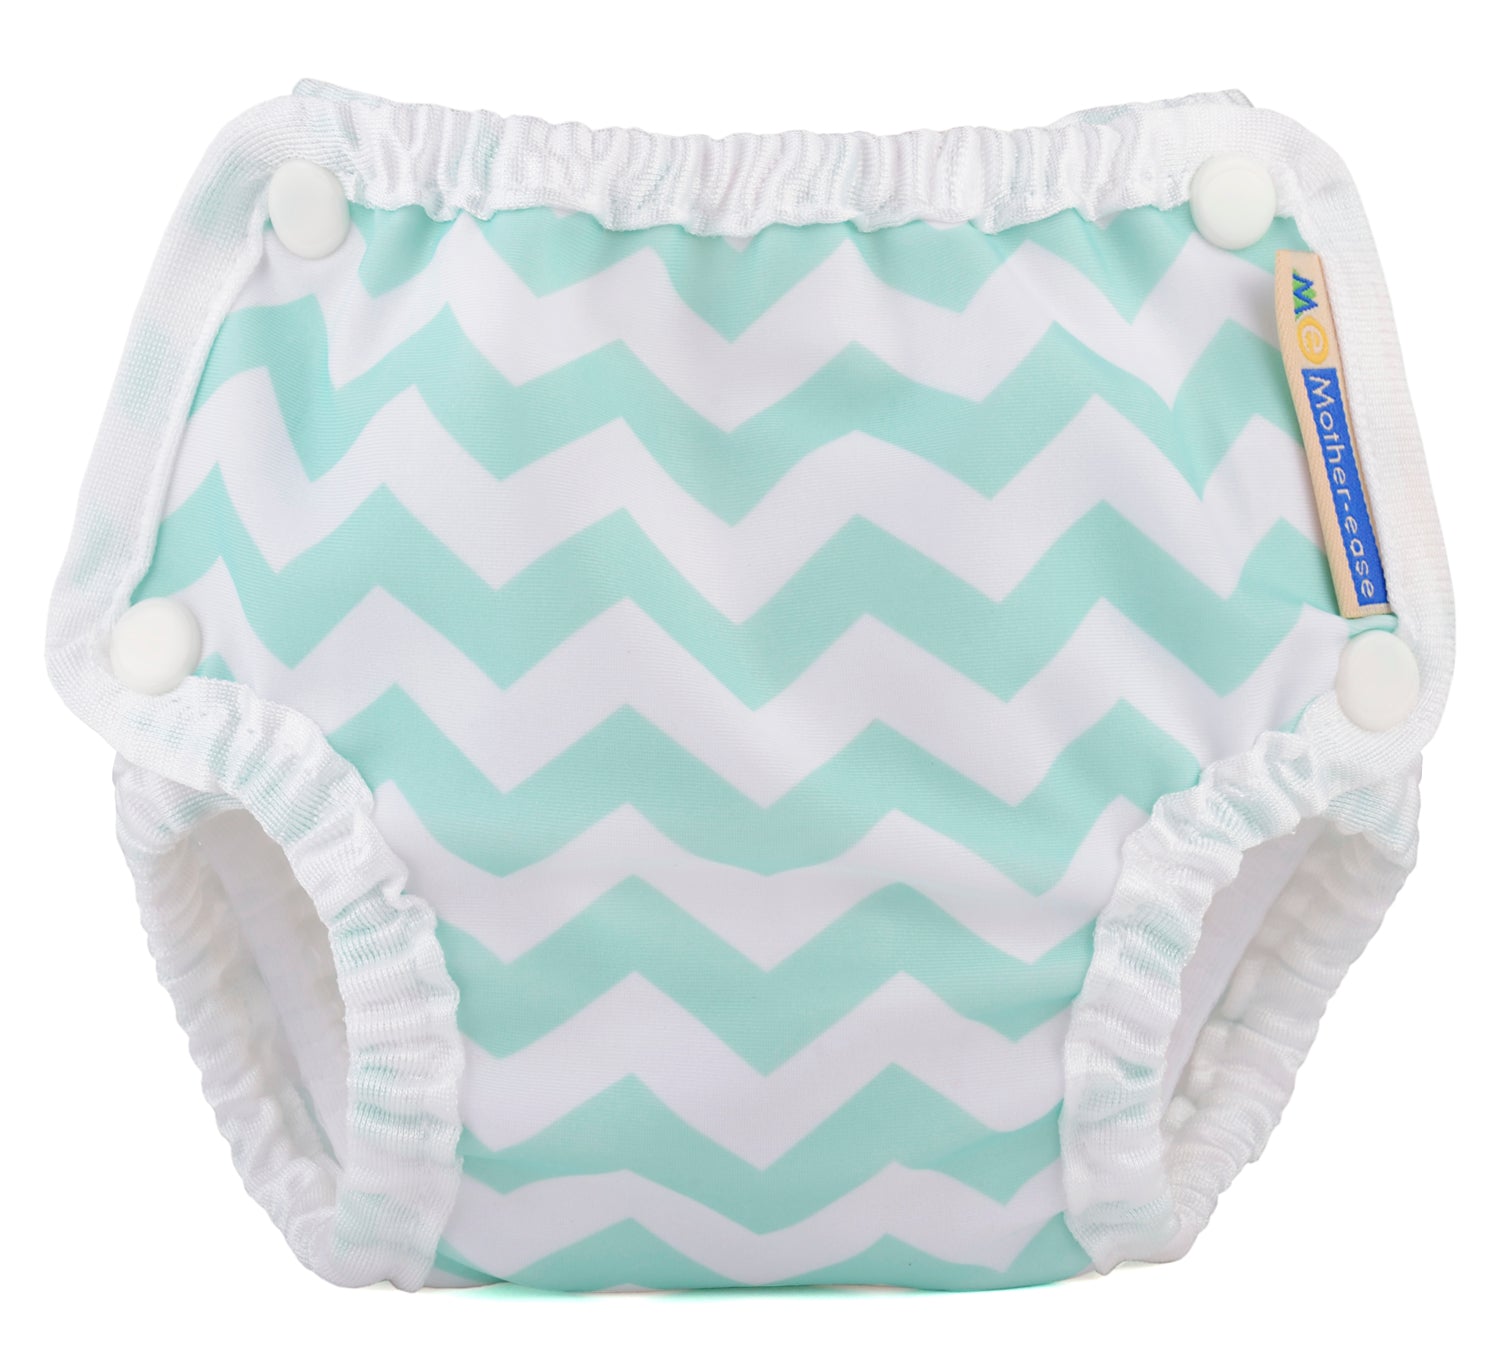 Mother-ease Swim Diapers, Buy Baby Products Online